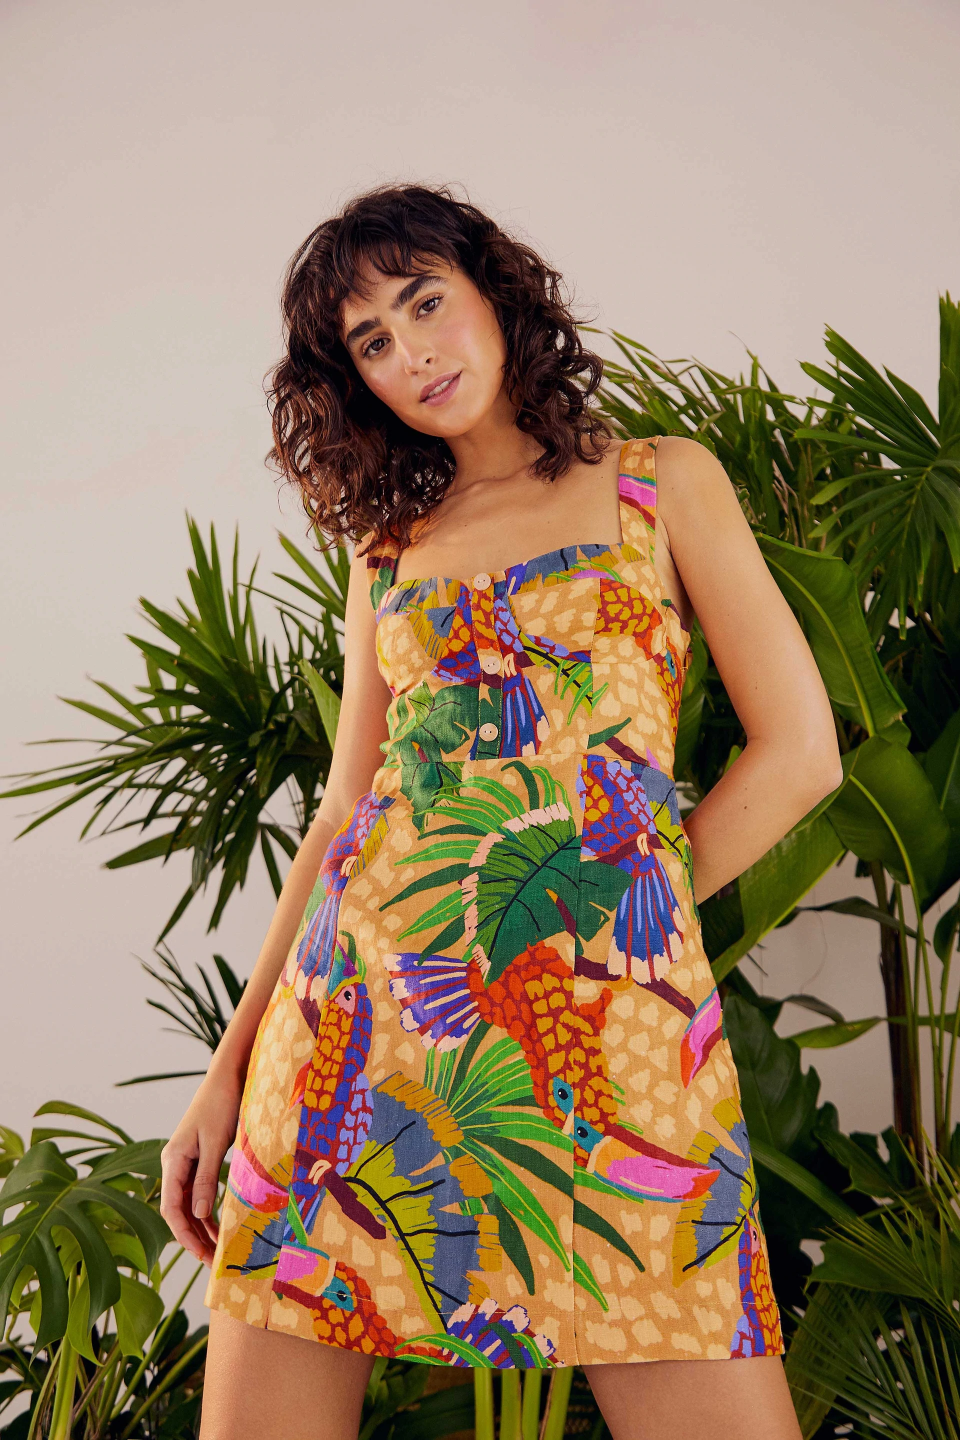 <br><br><strong>Farm Rio</strong> Sand Painted Toucans Mini Dress, $, available at <a href="https://go.skimresources.com/?id=30283X879131&url=https%3A%2F%2Fwww.farmrio.com%2Fcollections%2Fsale%2Fproducts%2Fsand-painted-toucans-mini-dress" rel="nofollow noopener" target="_blank" data-ylk="slk:Farm Rio" class="link ">Farm Rio</a>